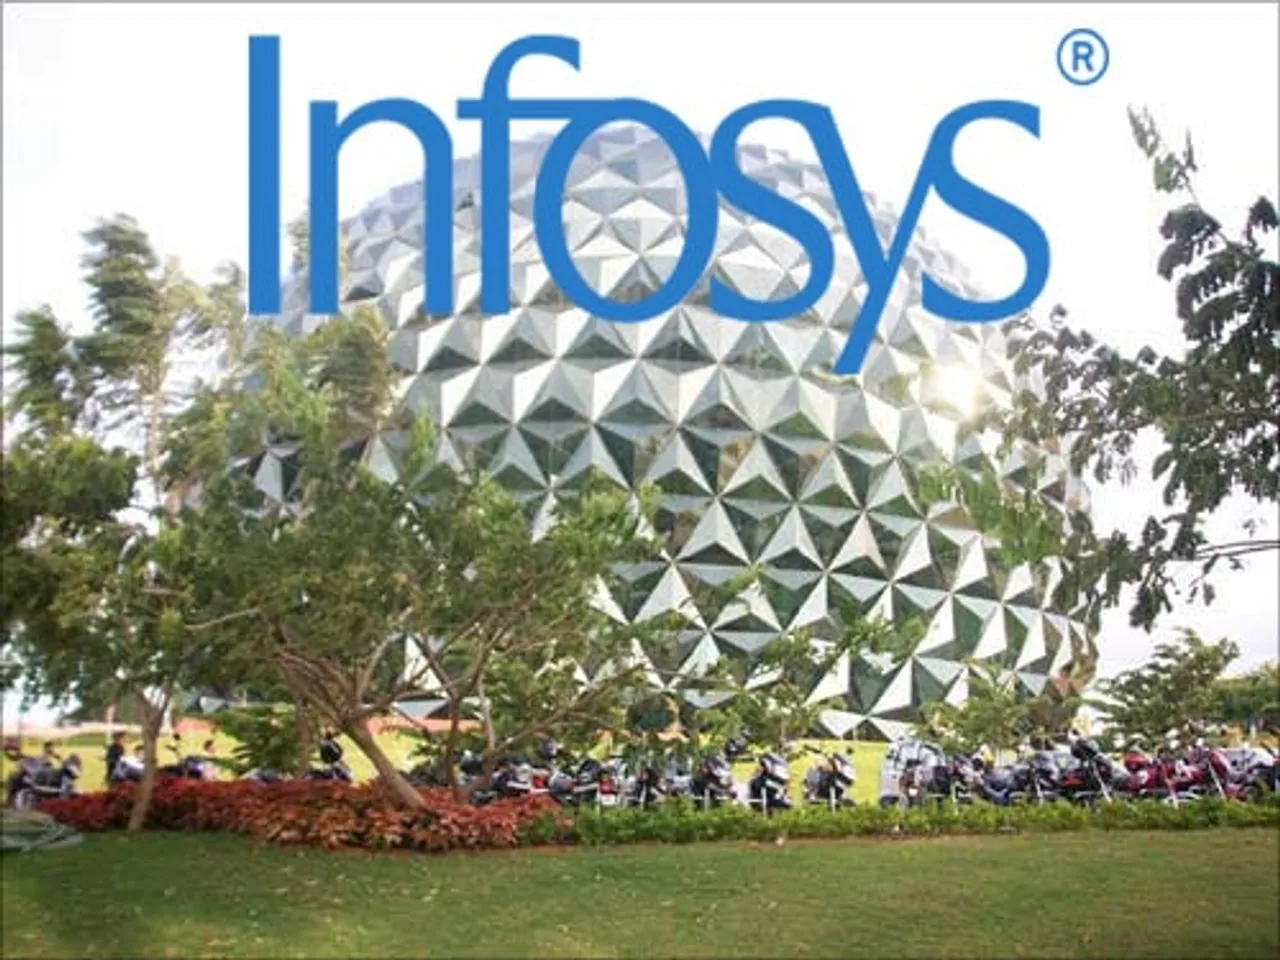 Infosys upgrades Artificial Intelligence platform with Nia